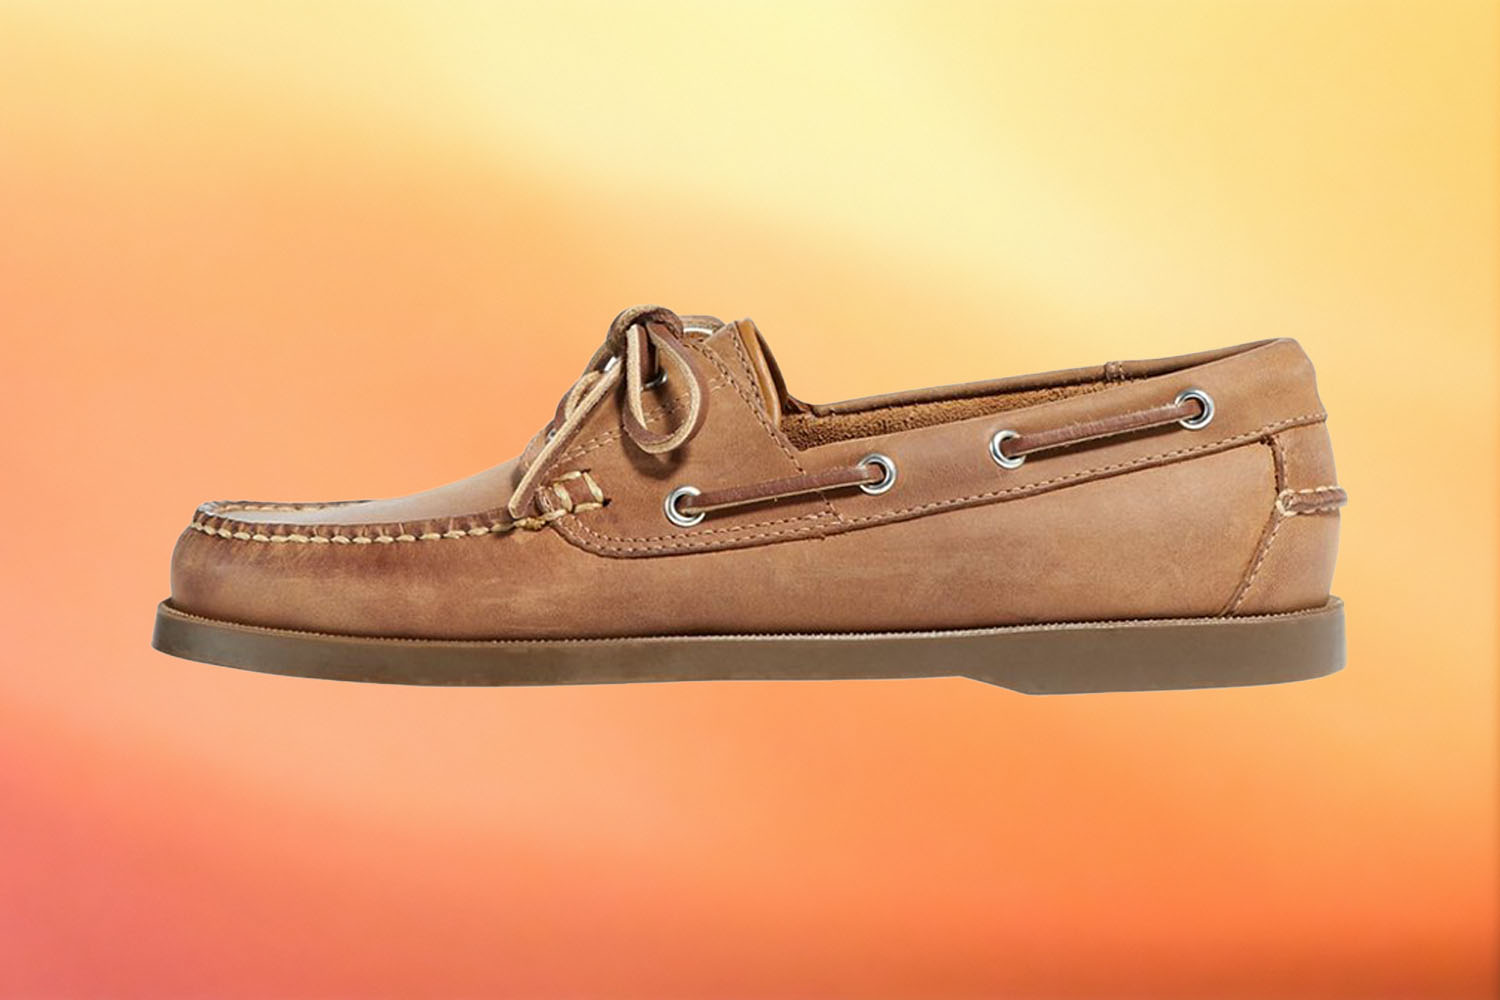 a tan leather boat shoe from L.L. Bean on a yellow-orange gradient background